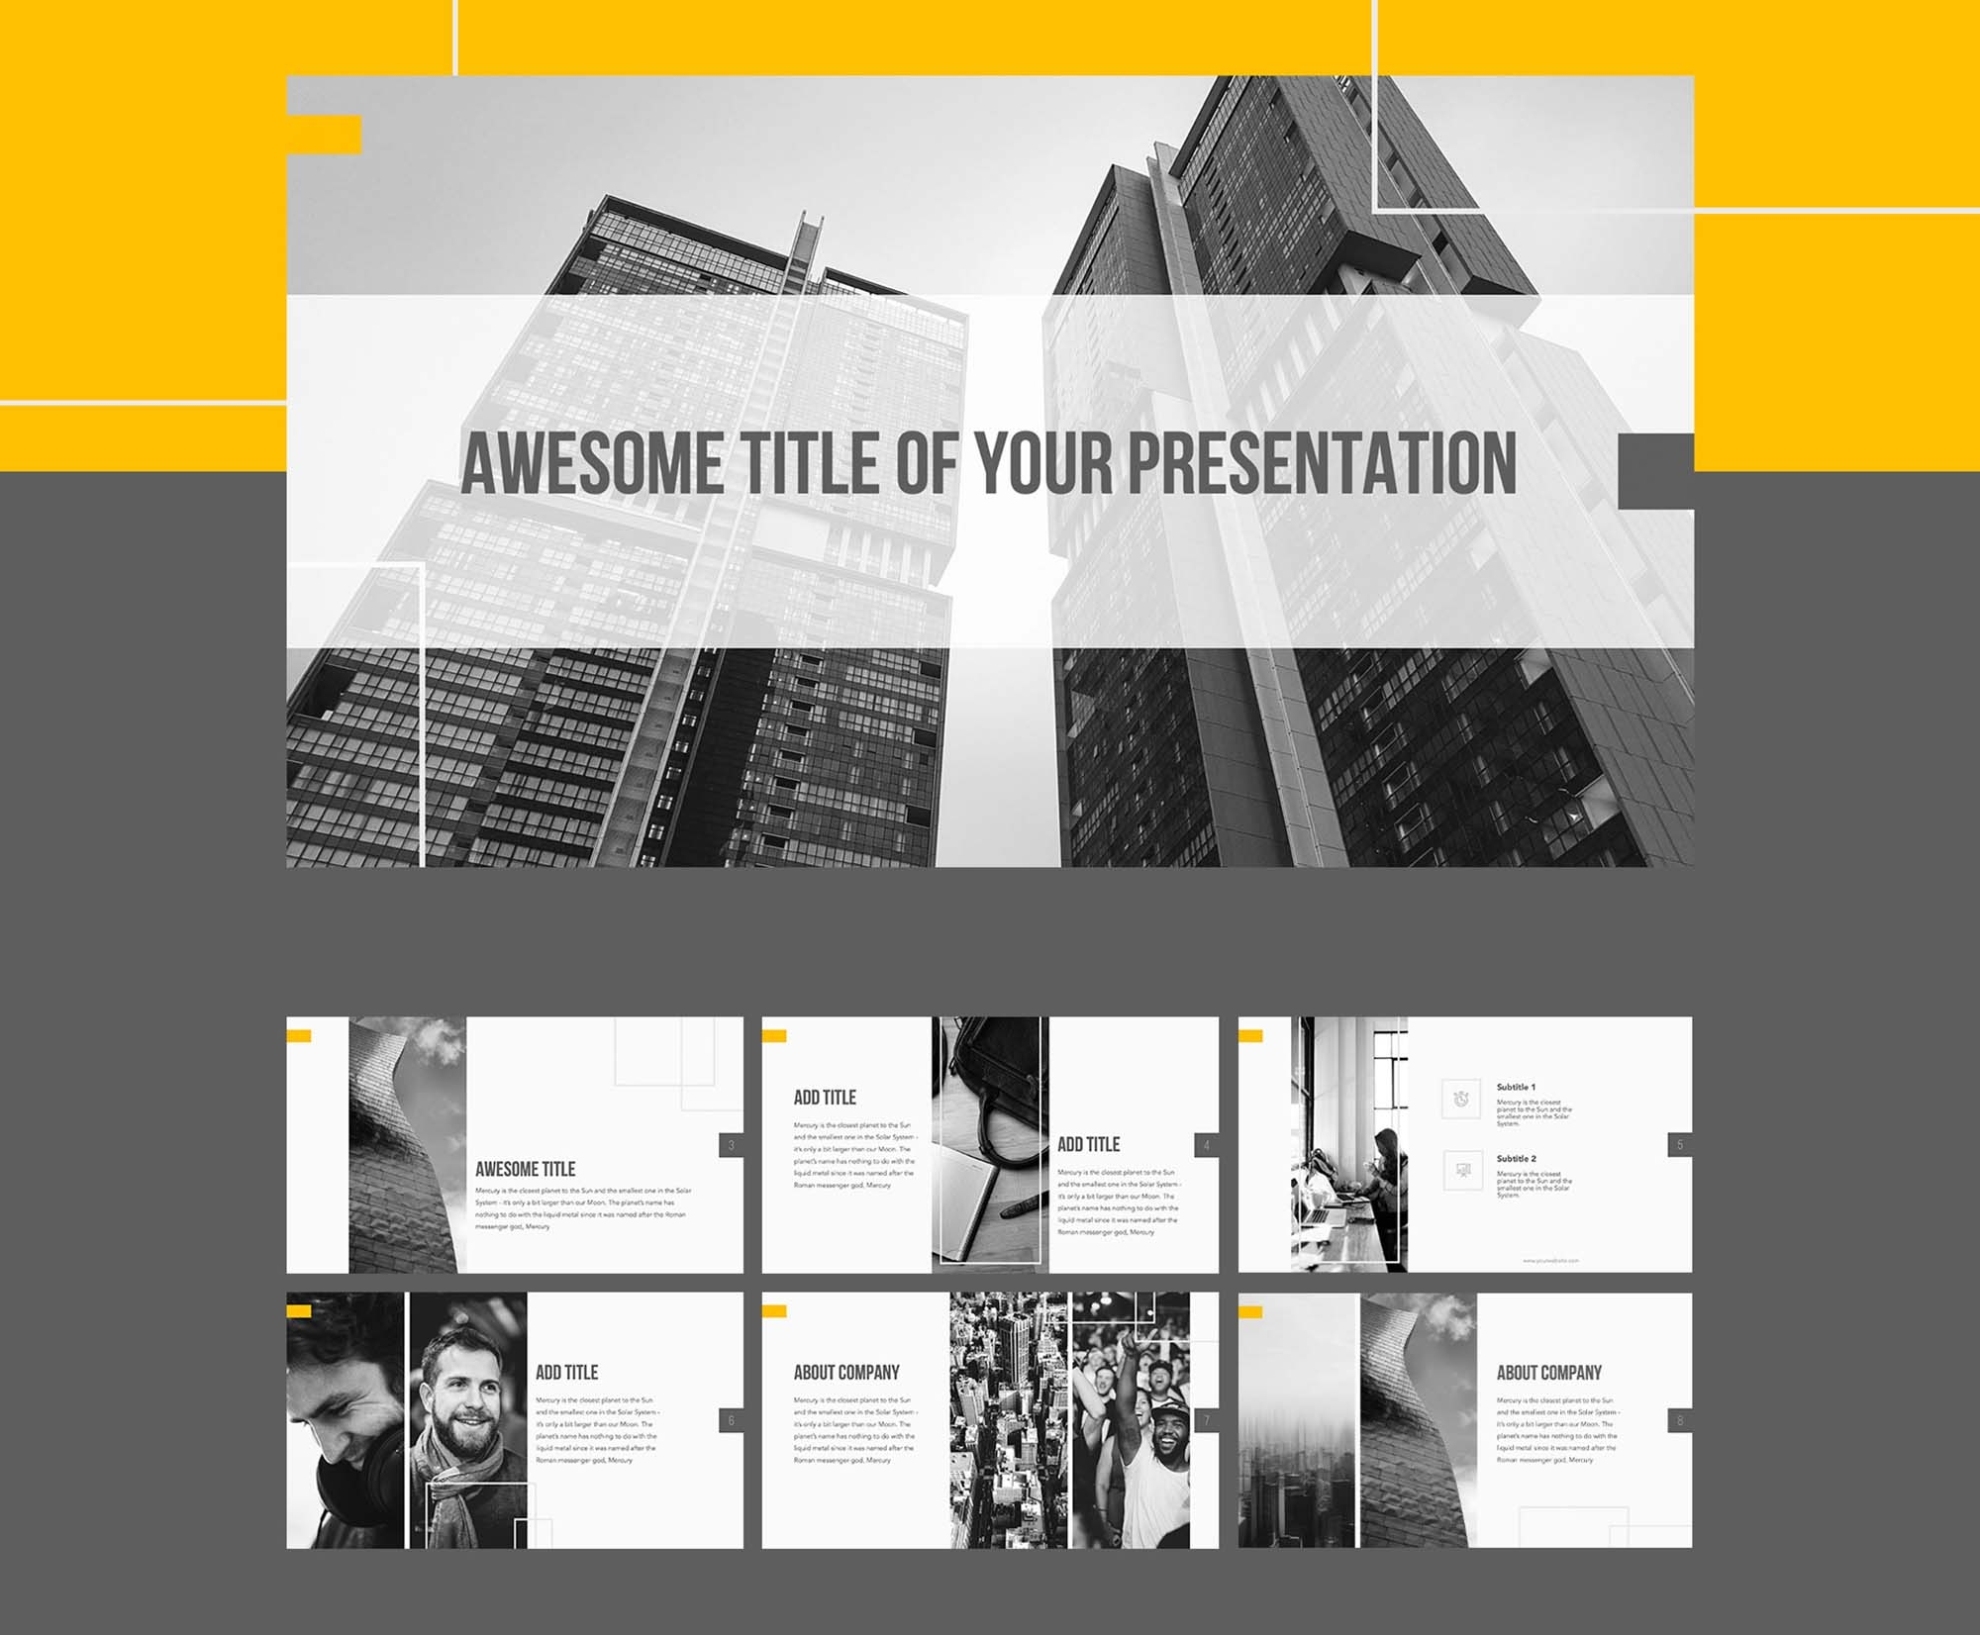 Free Powerpoint Presentation Template (Ppt) within Sample Templates For Powerpoint Presentation